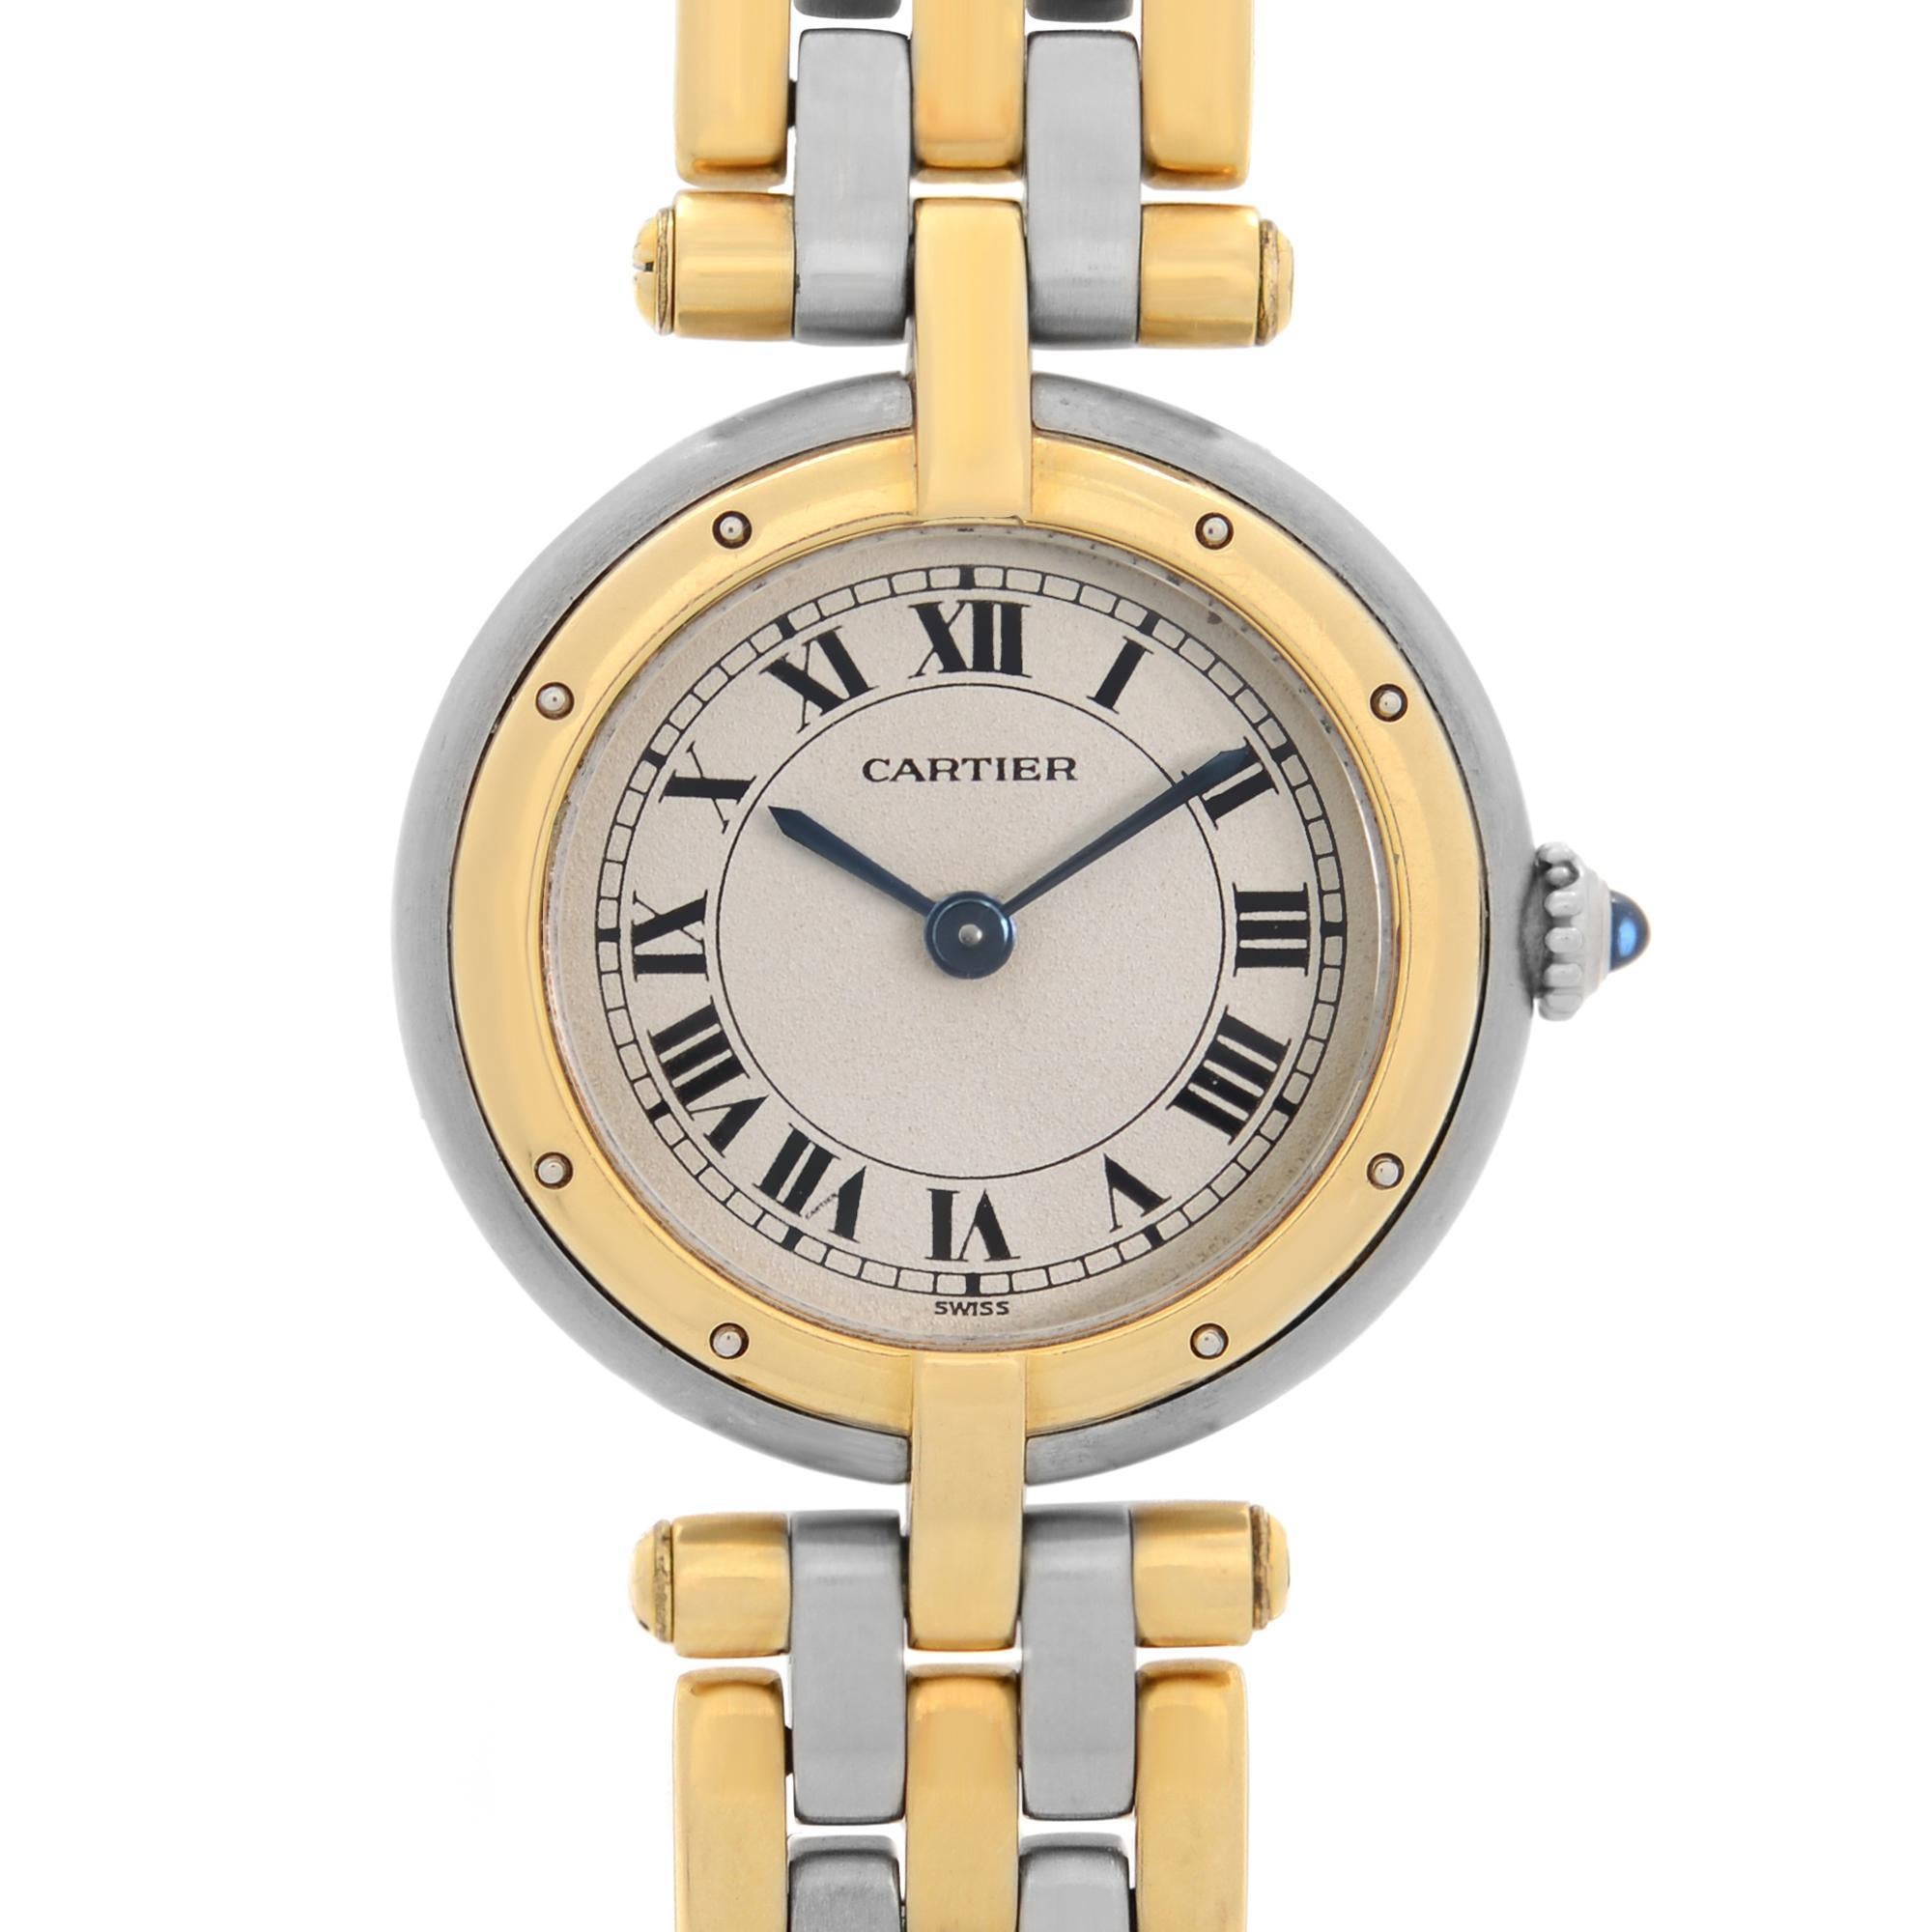 Pre-owned Cartier Panthere 24mm 18k Yellow Gold Steel Beige Quartz Ladies Watch 166920. Band Shows Slacks Due to the Age of the Watch. This Beautiful Timepiece is Powered by Quartz (Battery) Movement And Features: Round Stainless Steel Case with